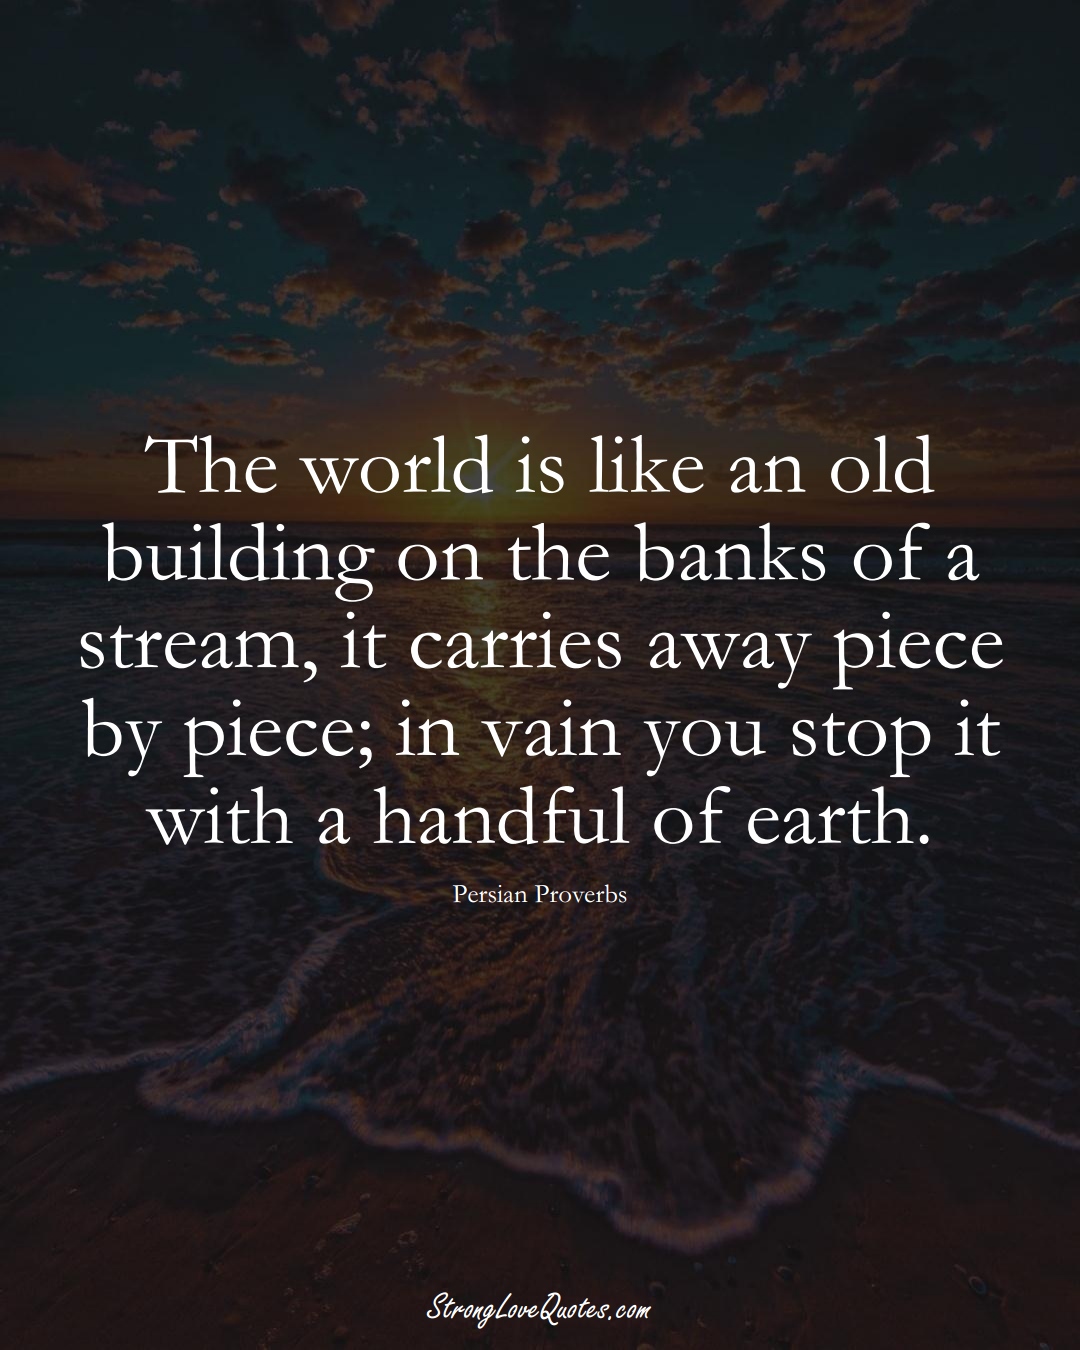 The world is like an old building on the banks of a stream, it carries away piece by piece; in vain you stop it with a handful of earth. (Persian Sayings);  #aVarietyofCulturesSayings